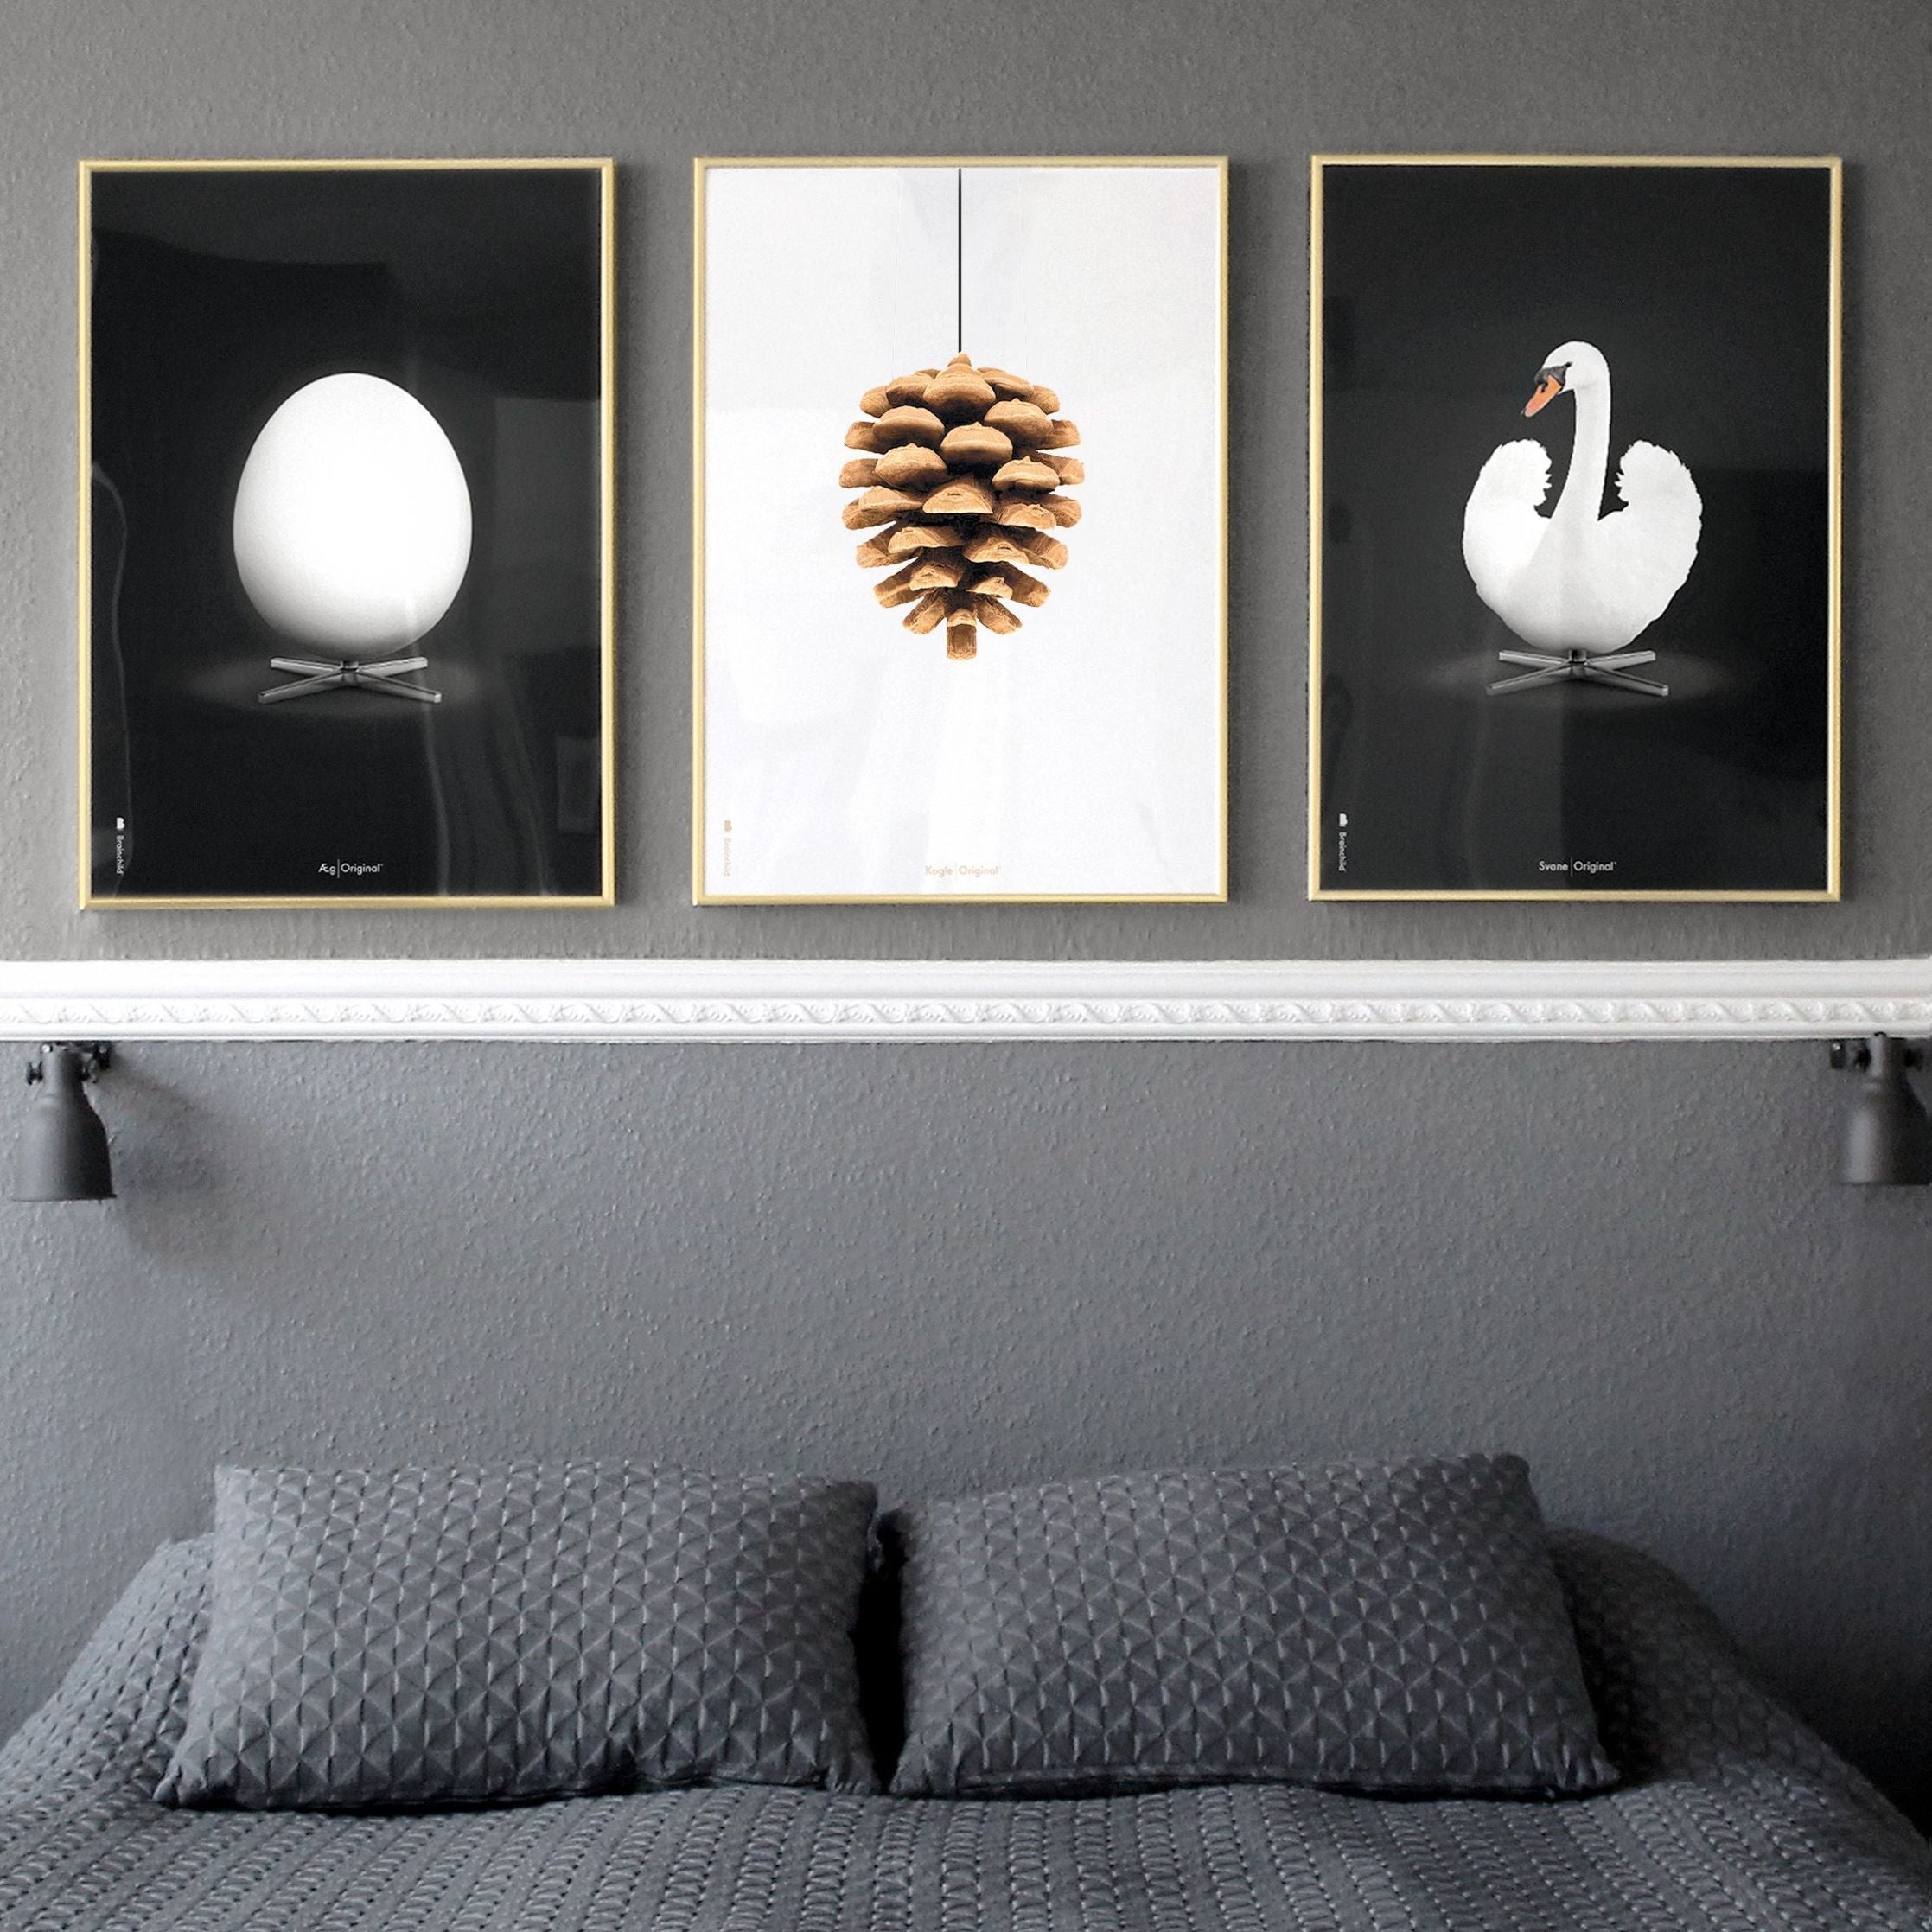 Brainchild Egg Classic Poster, Frame In Black Lacquered Wood A5, Black Background